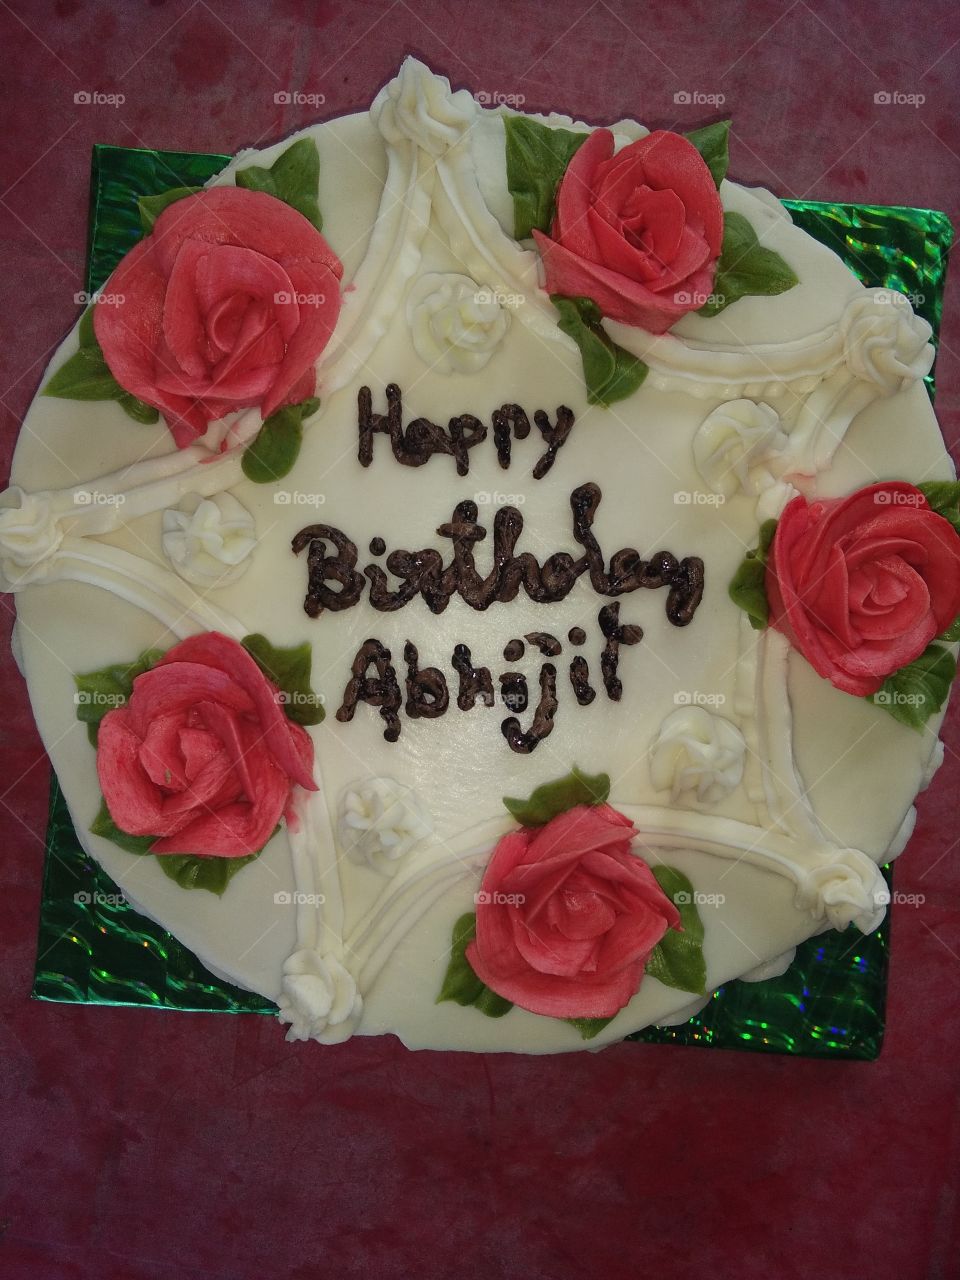 Birthday Cake With rose flower decorations